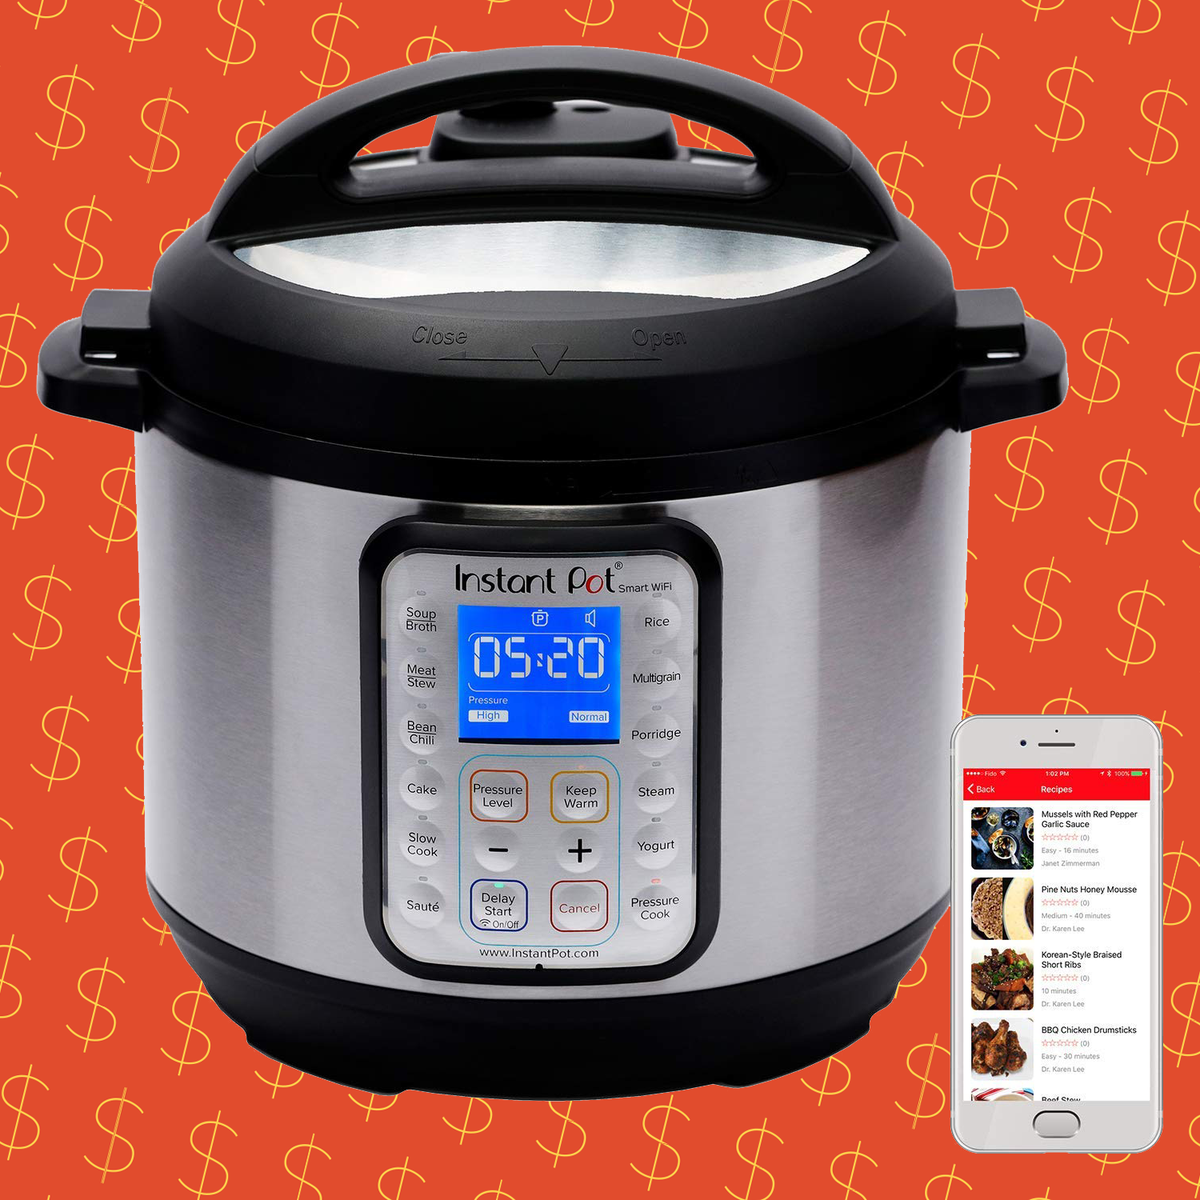 https://hips.hearstapps.com/hmg-prod/images/instant-pot-cyber-monday-1543246638.png?crop=0.5xw:1xh;center,top&resize=1200:*